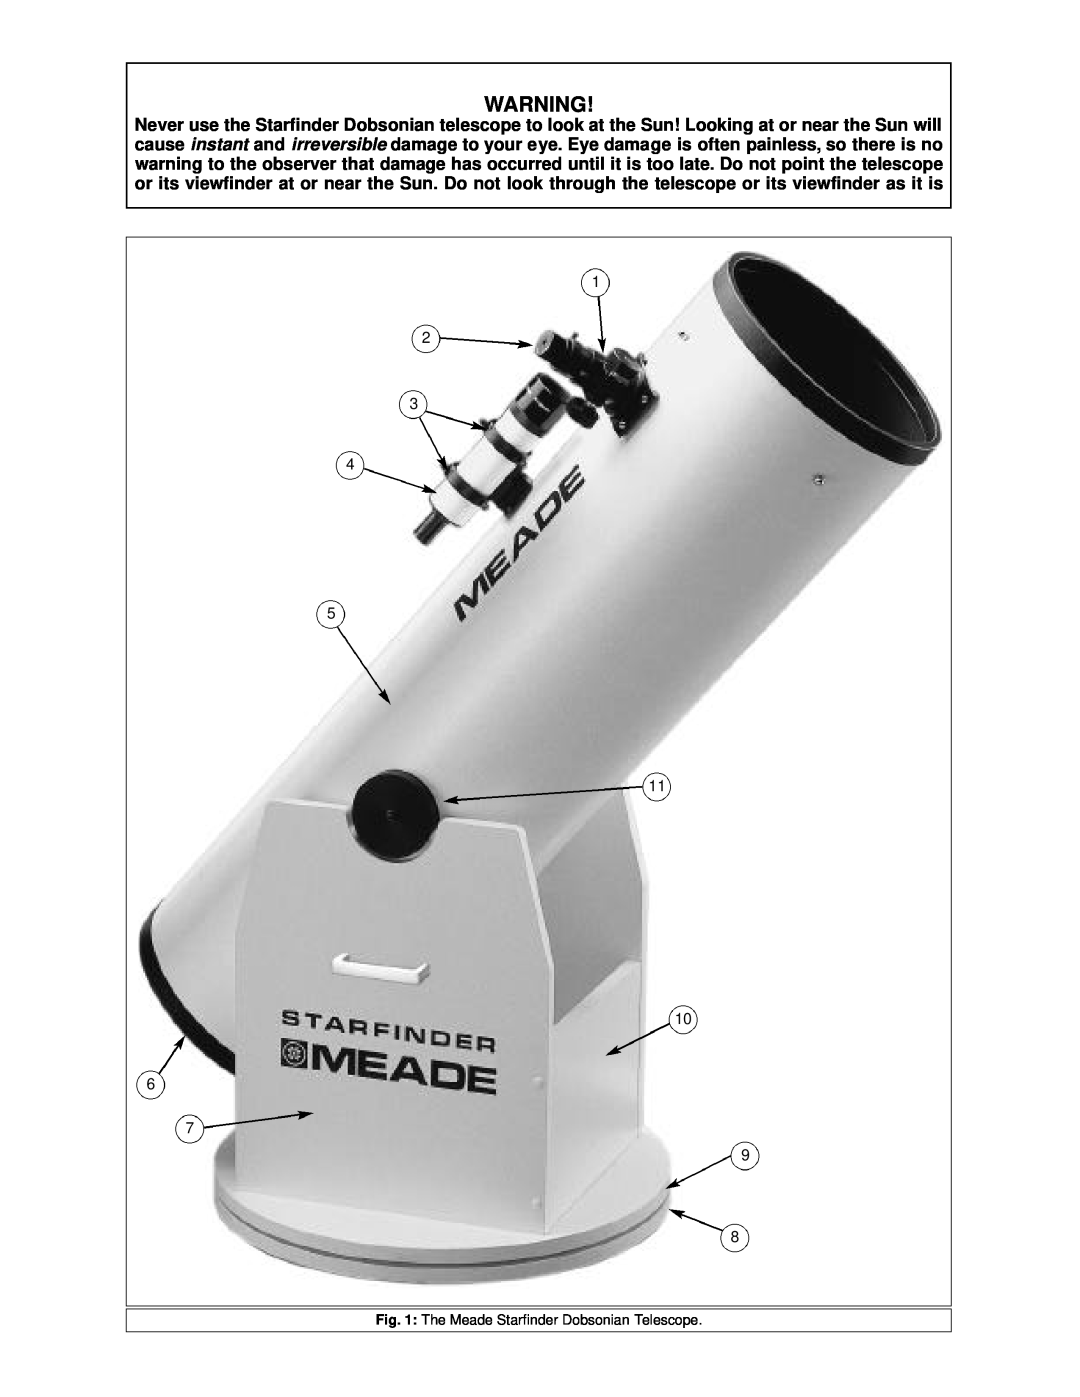 Meade 12.5 instruction manual The Meade Starfinder Dobsonian Telescope 